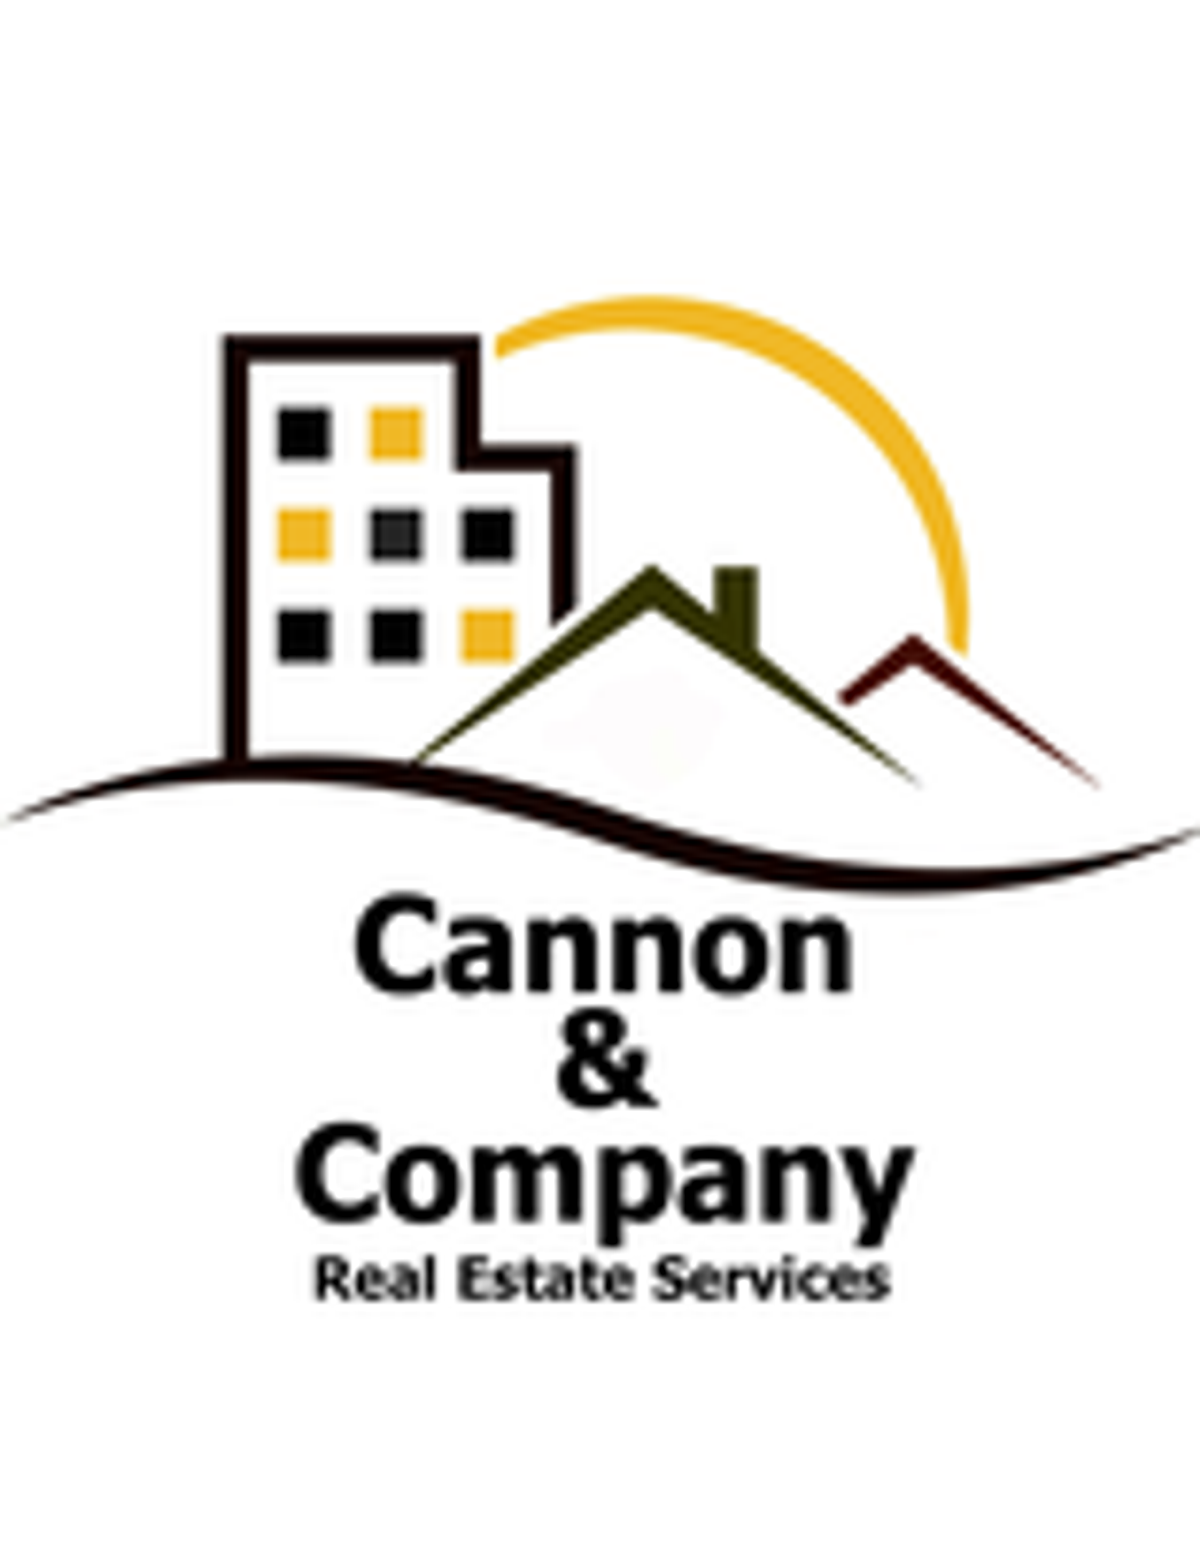 Photo for Bree Winegar, Listing Agent at Cannon & Company